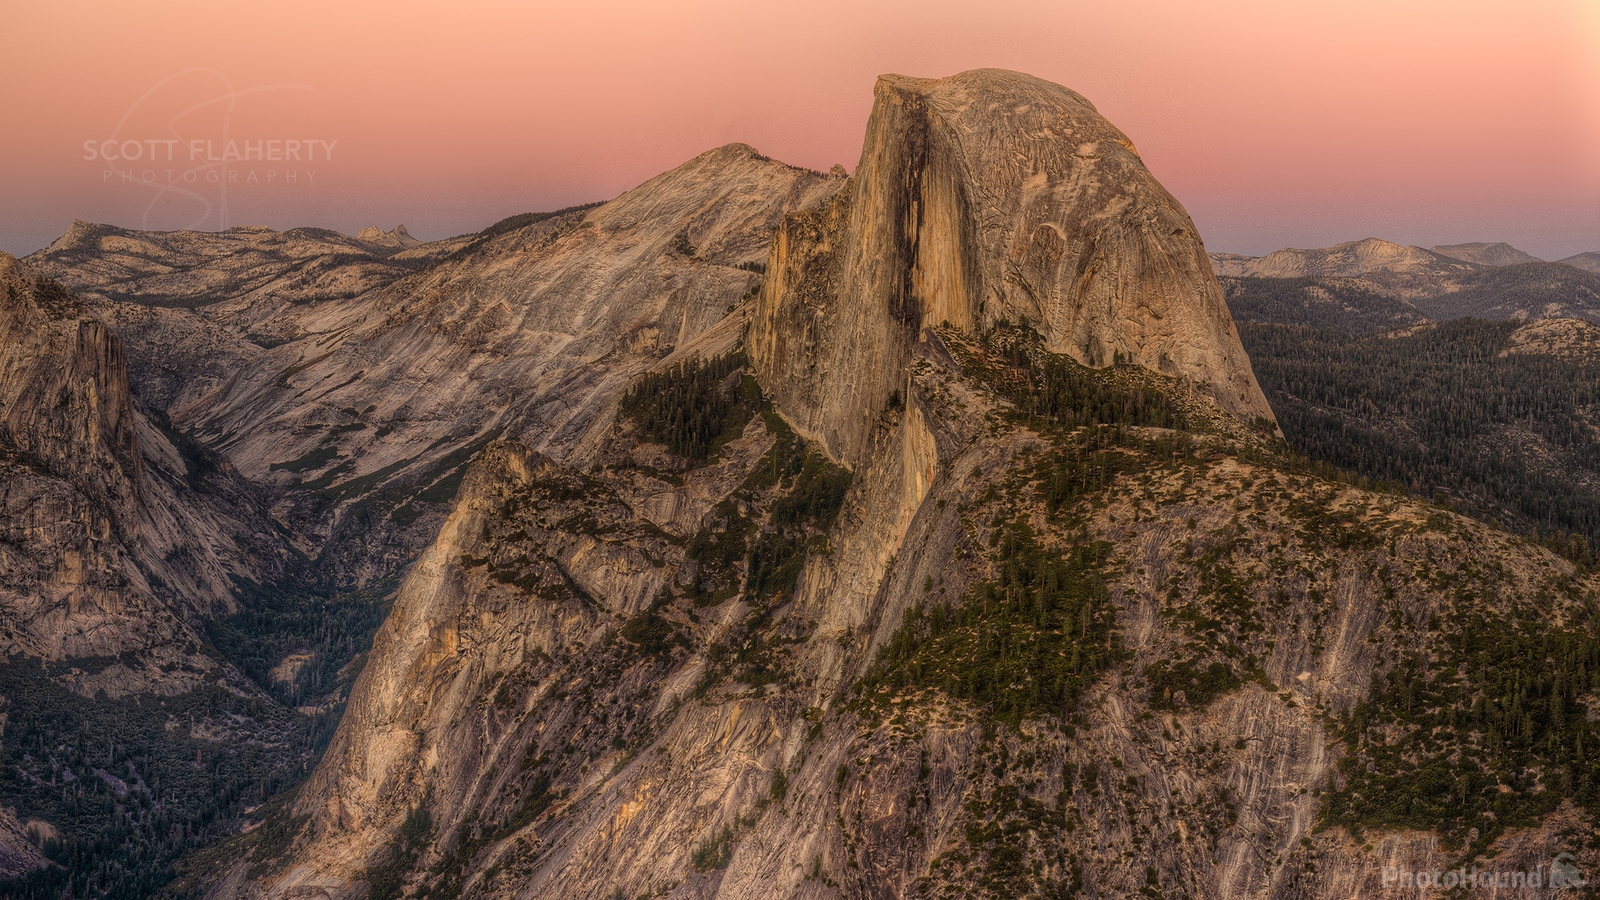 Image of Glacier Point by Scott Flaherty